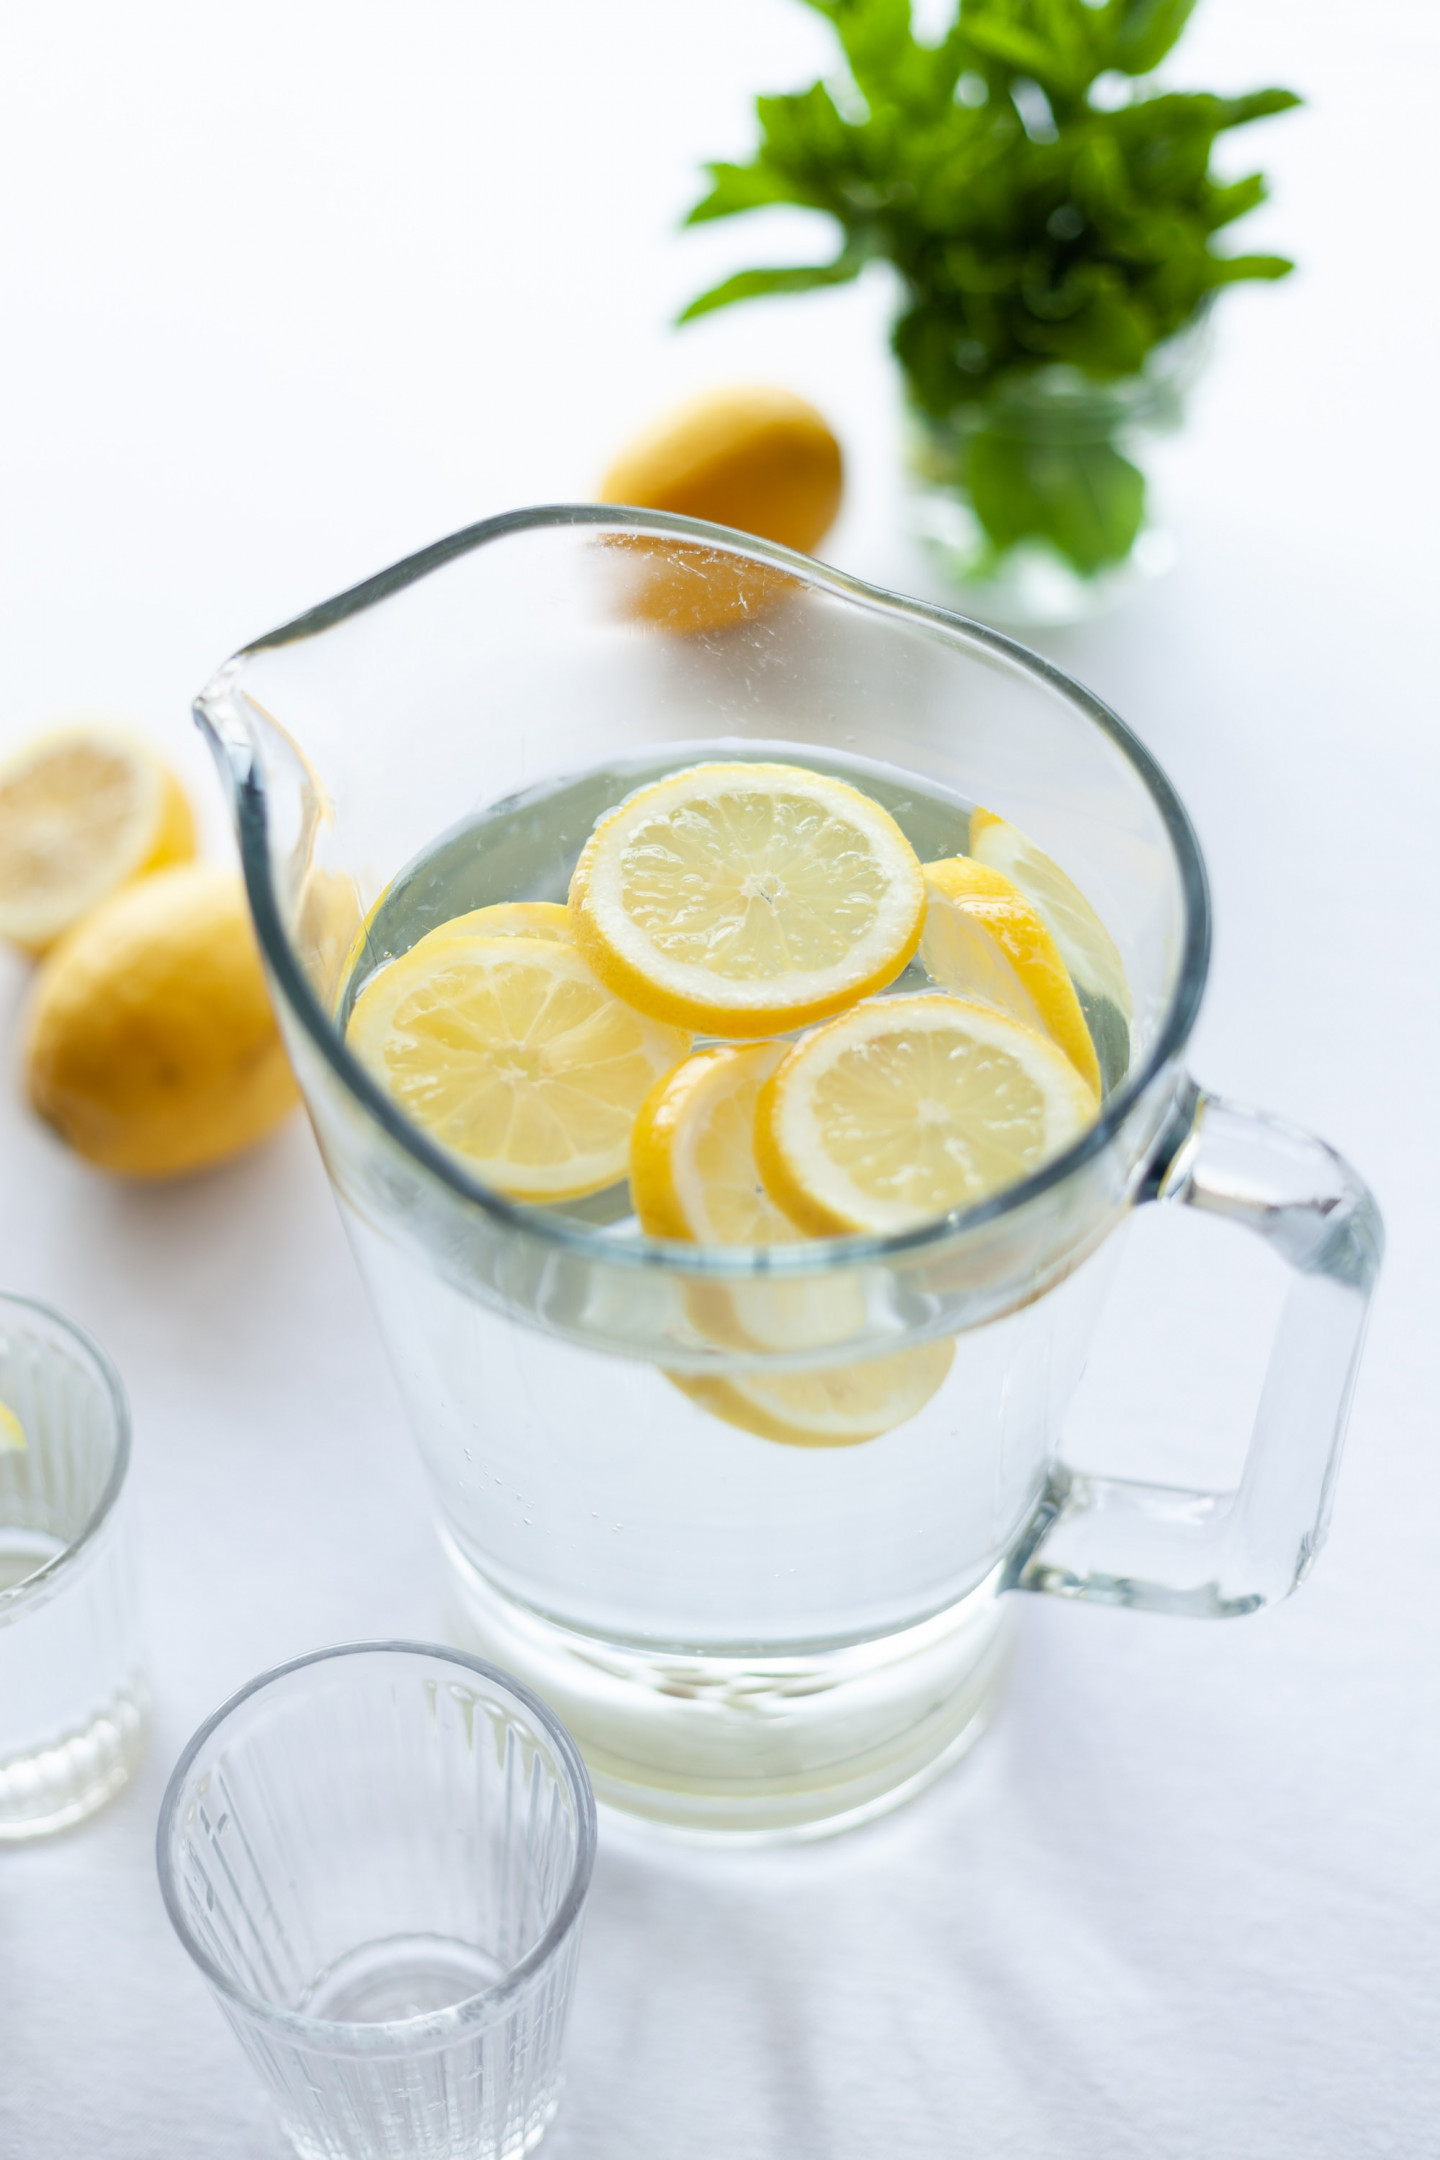 Home Skincare Tips: Drink plenty of water! 